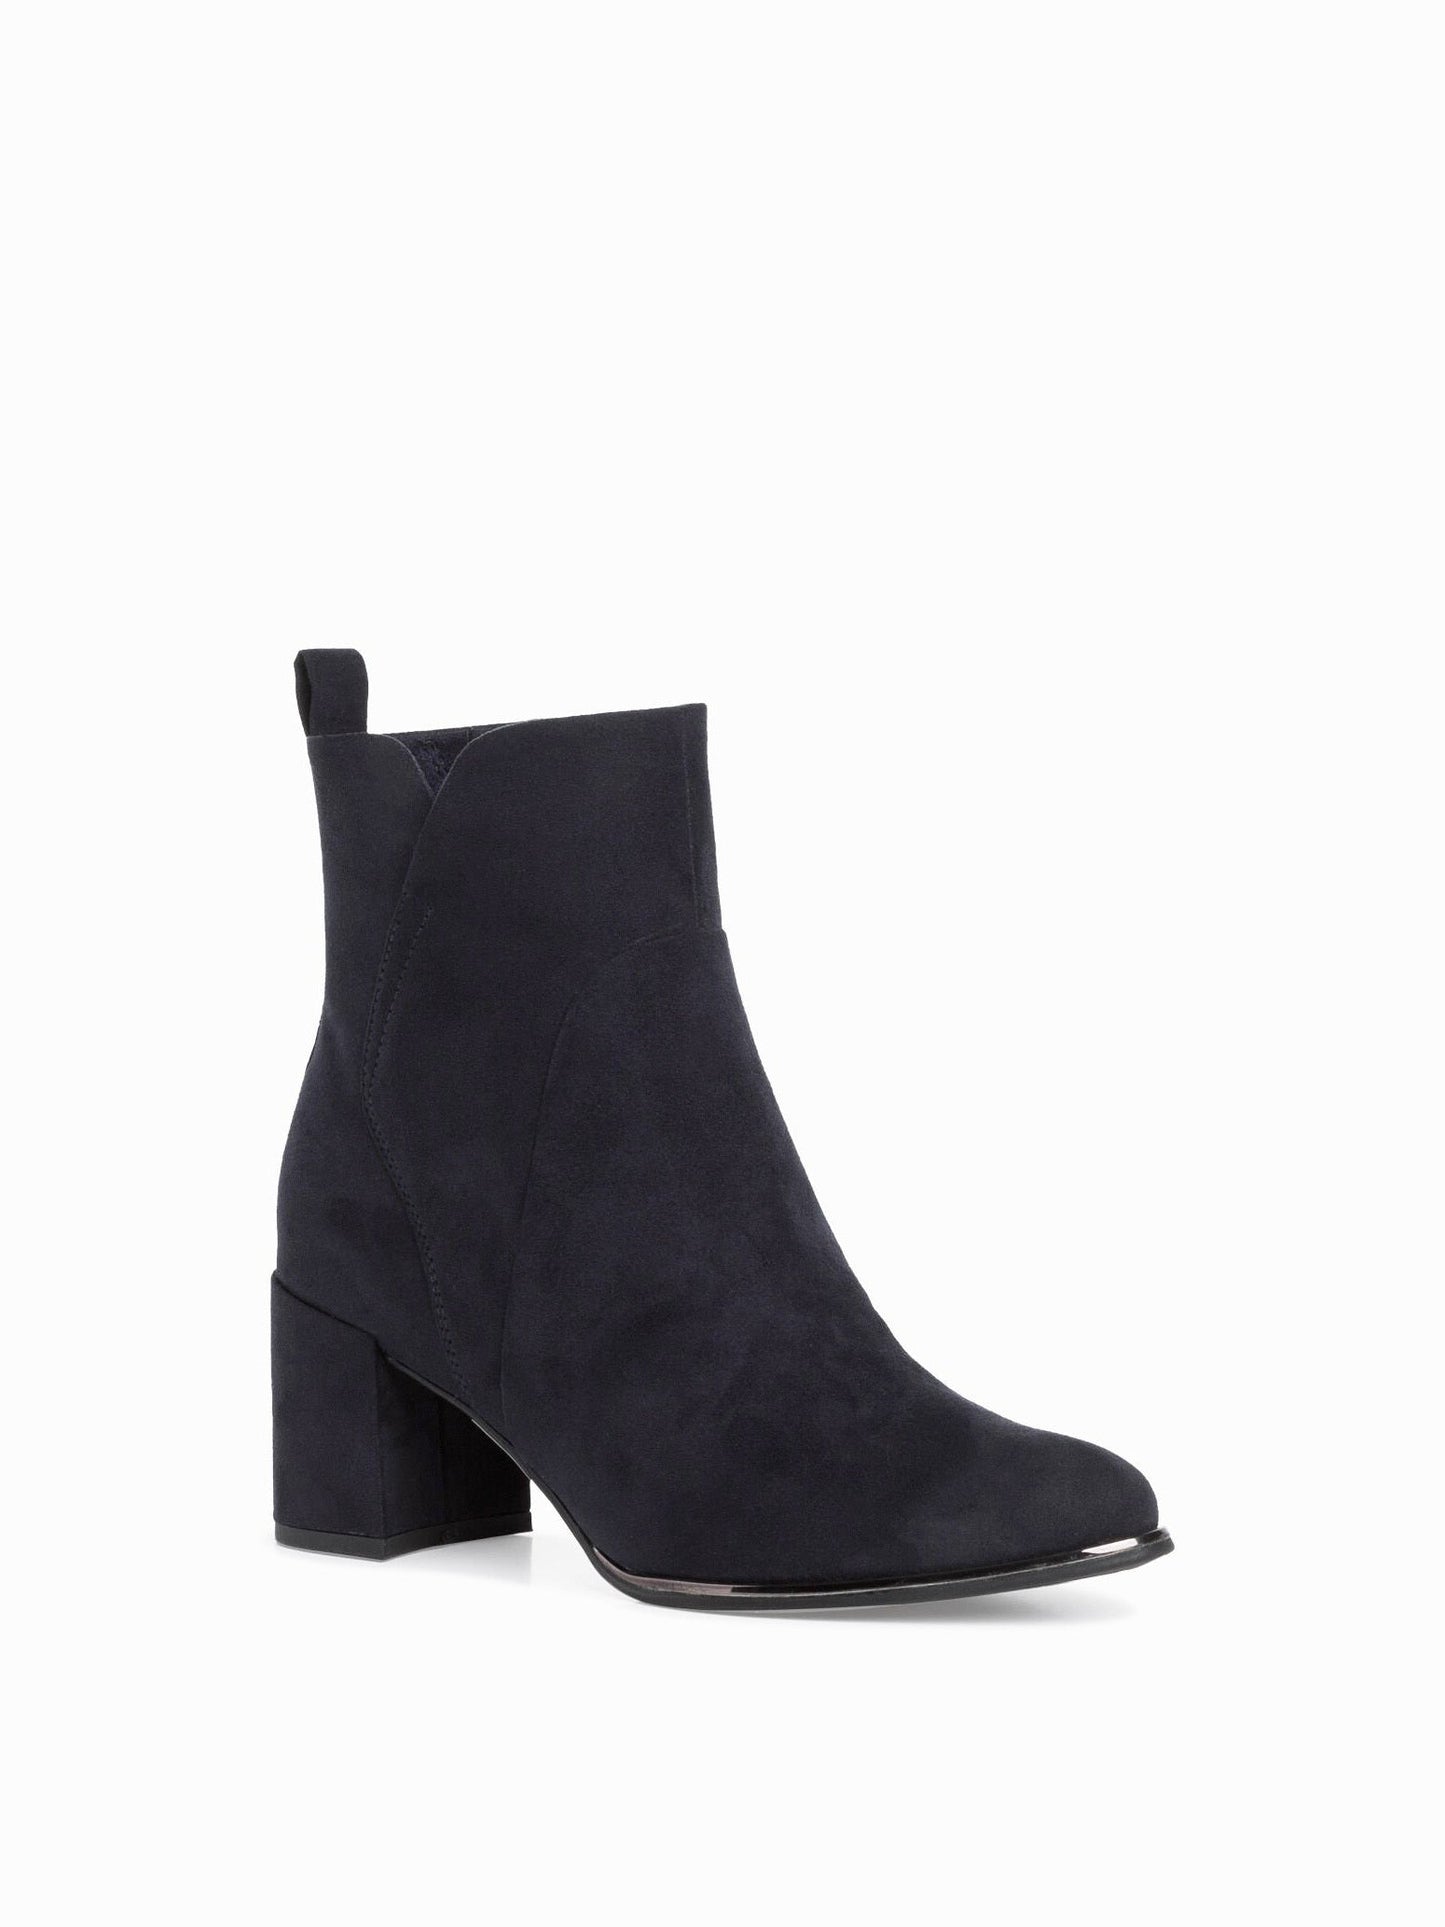 Marco Tozzi - Black Ankle Boot - 25095 W3